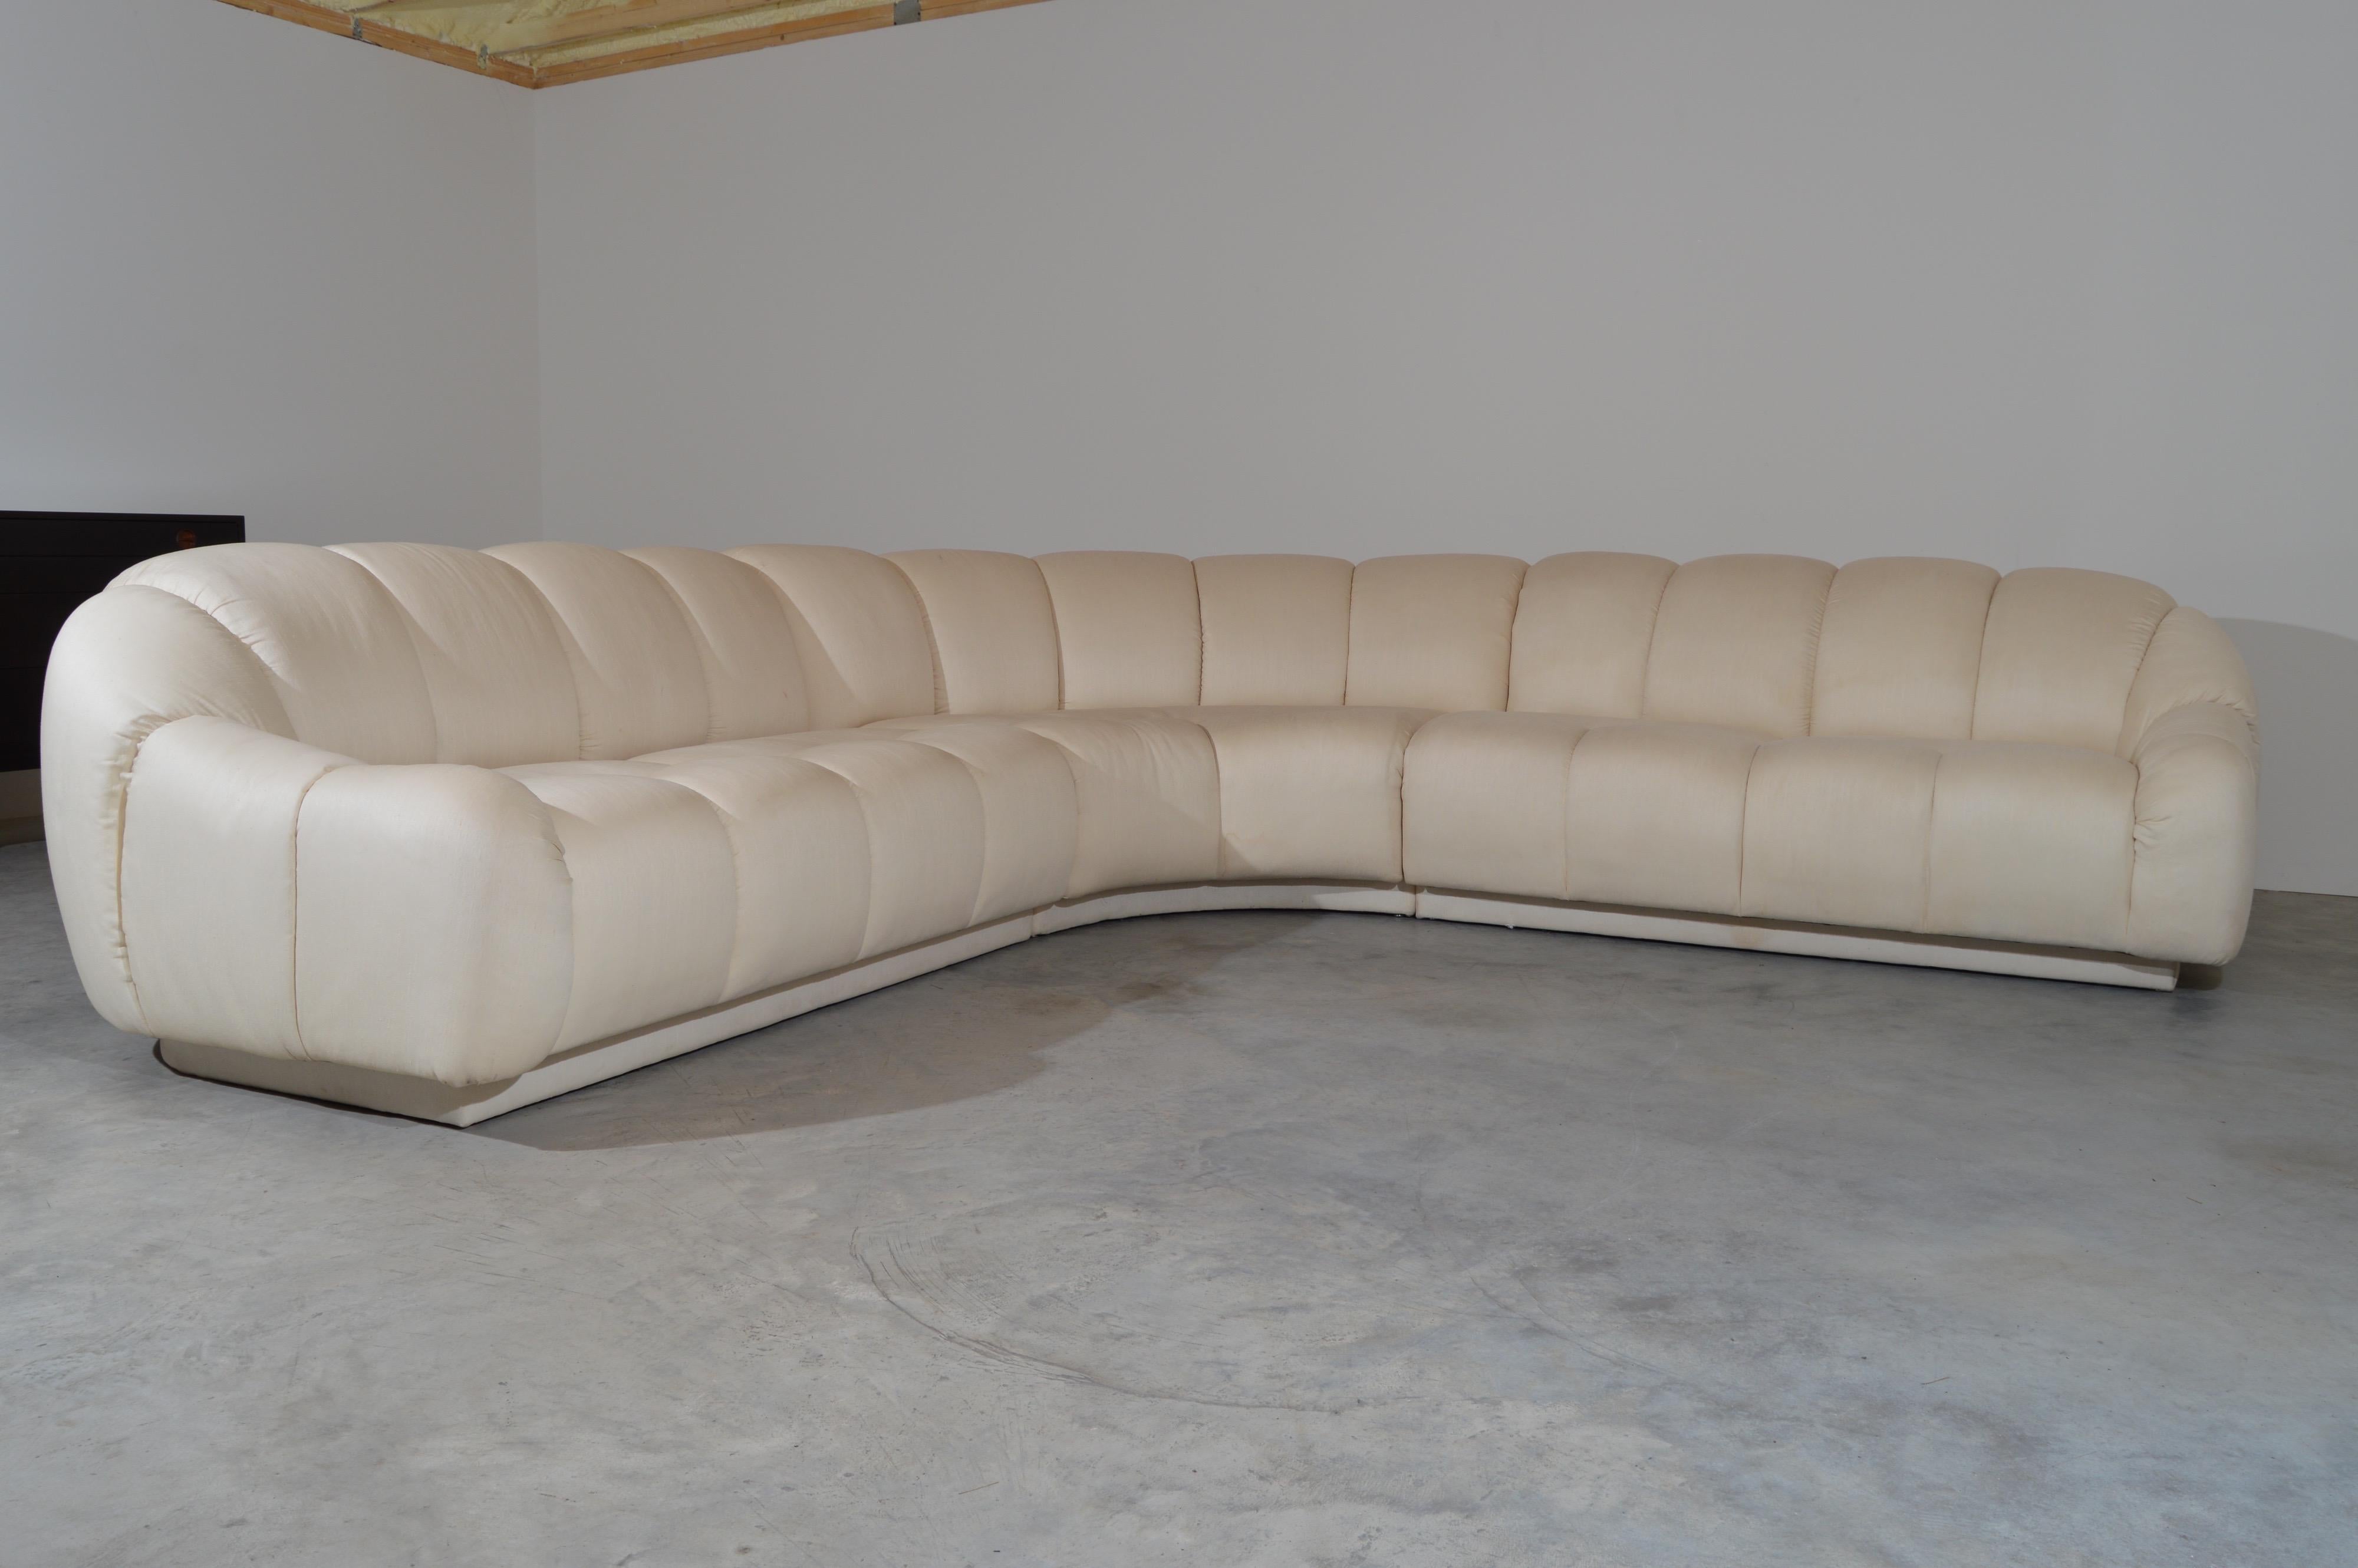 3 Piece sectional sofa in the style of Steve Chase having thick tufted channel backrest with overstuffed seats. Upholstered in a silky cotton poly blend. 
Center section 30x74x39 HWD SH 17”
Left & Right Sections 30x60x40” HWD SH 17”
Total width